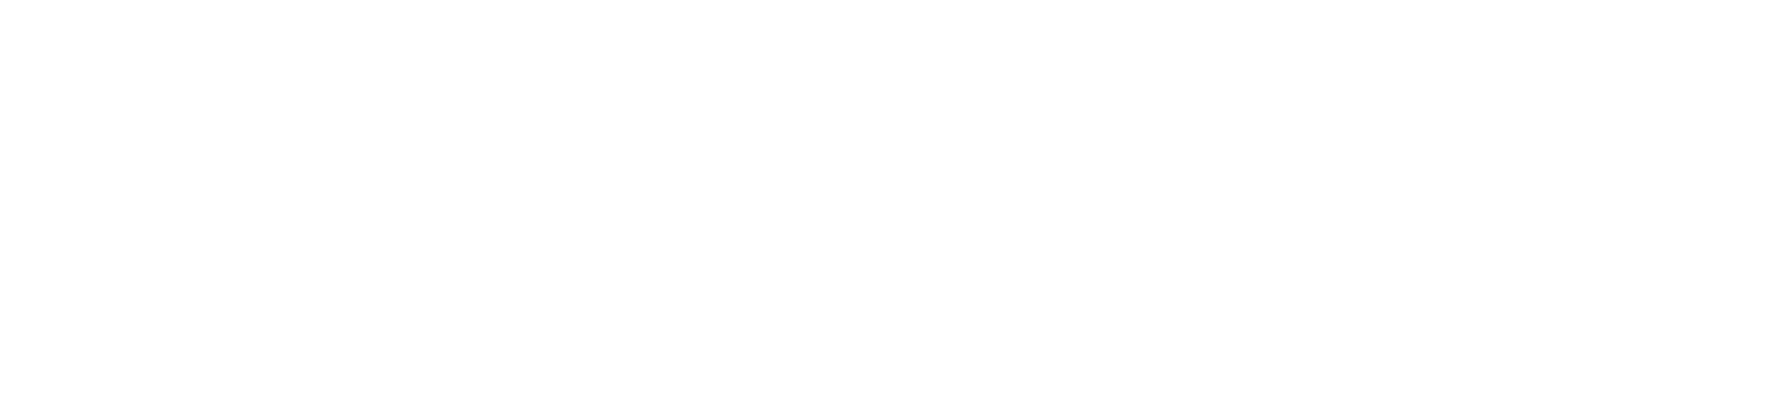 Logo for KCS Professional Services in white